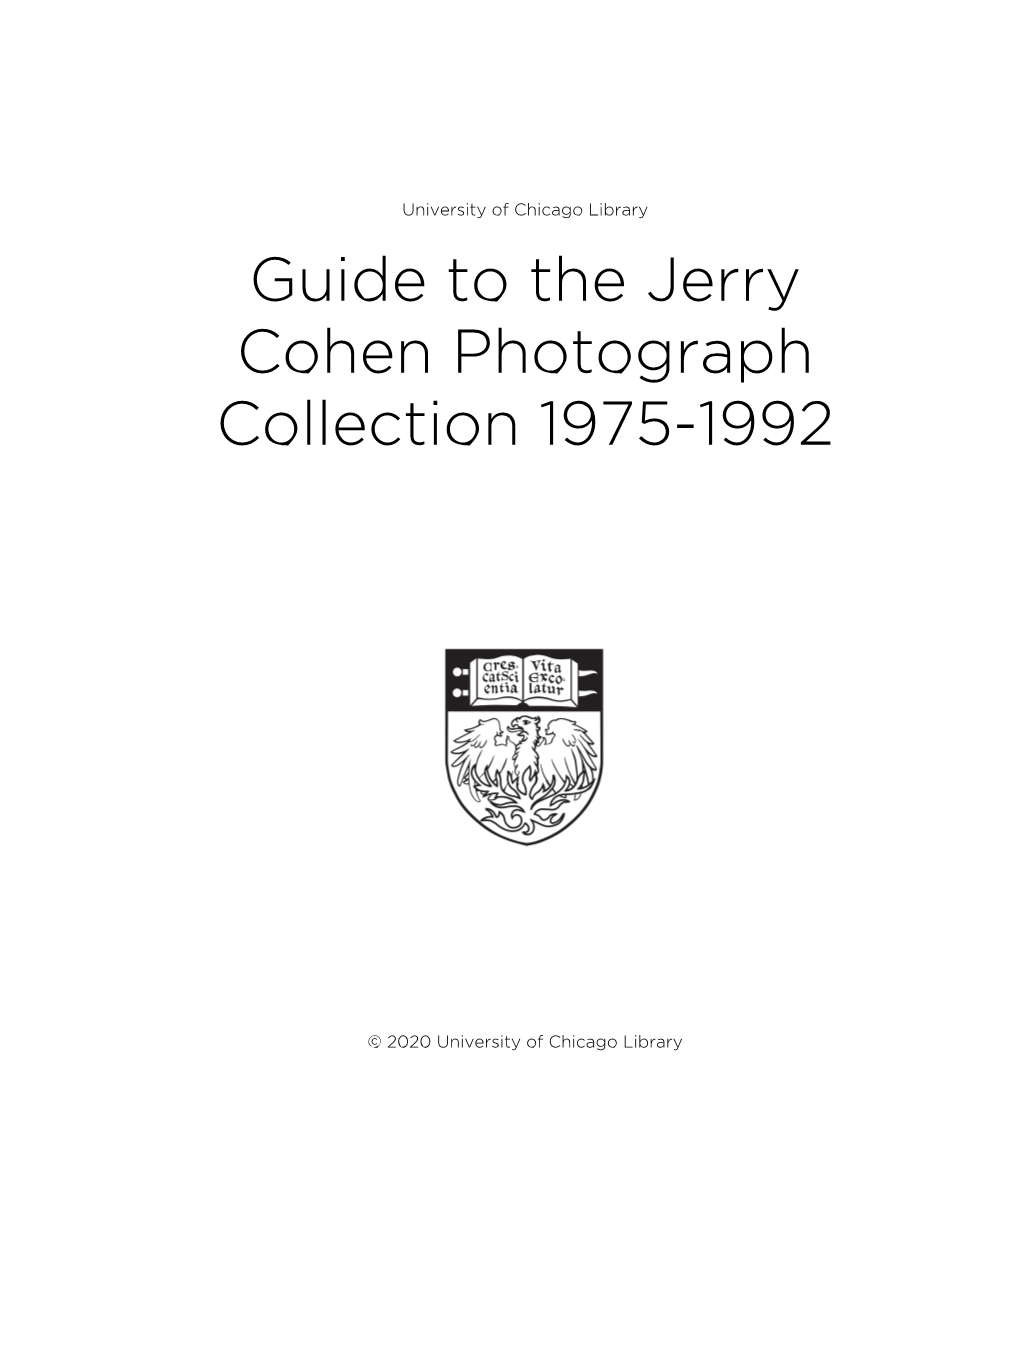 Guide to the Jerry Cohen Photograph Collection 1975-1992